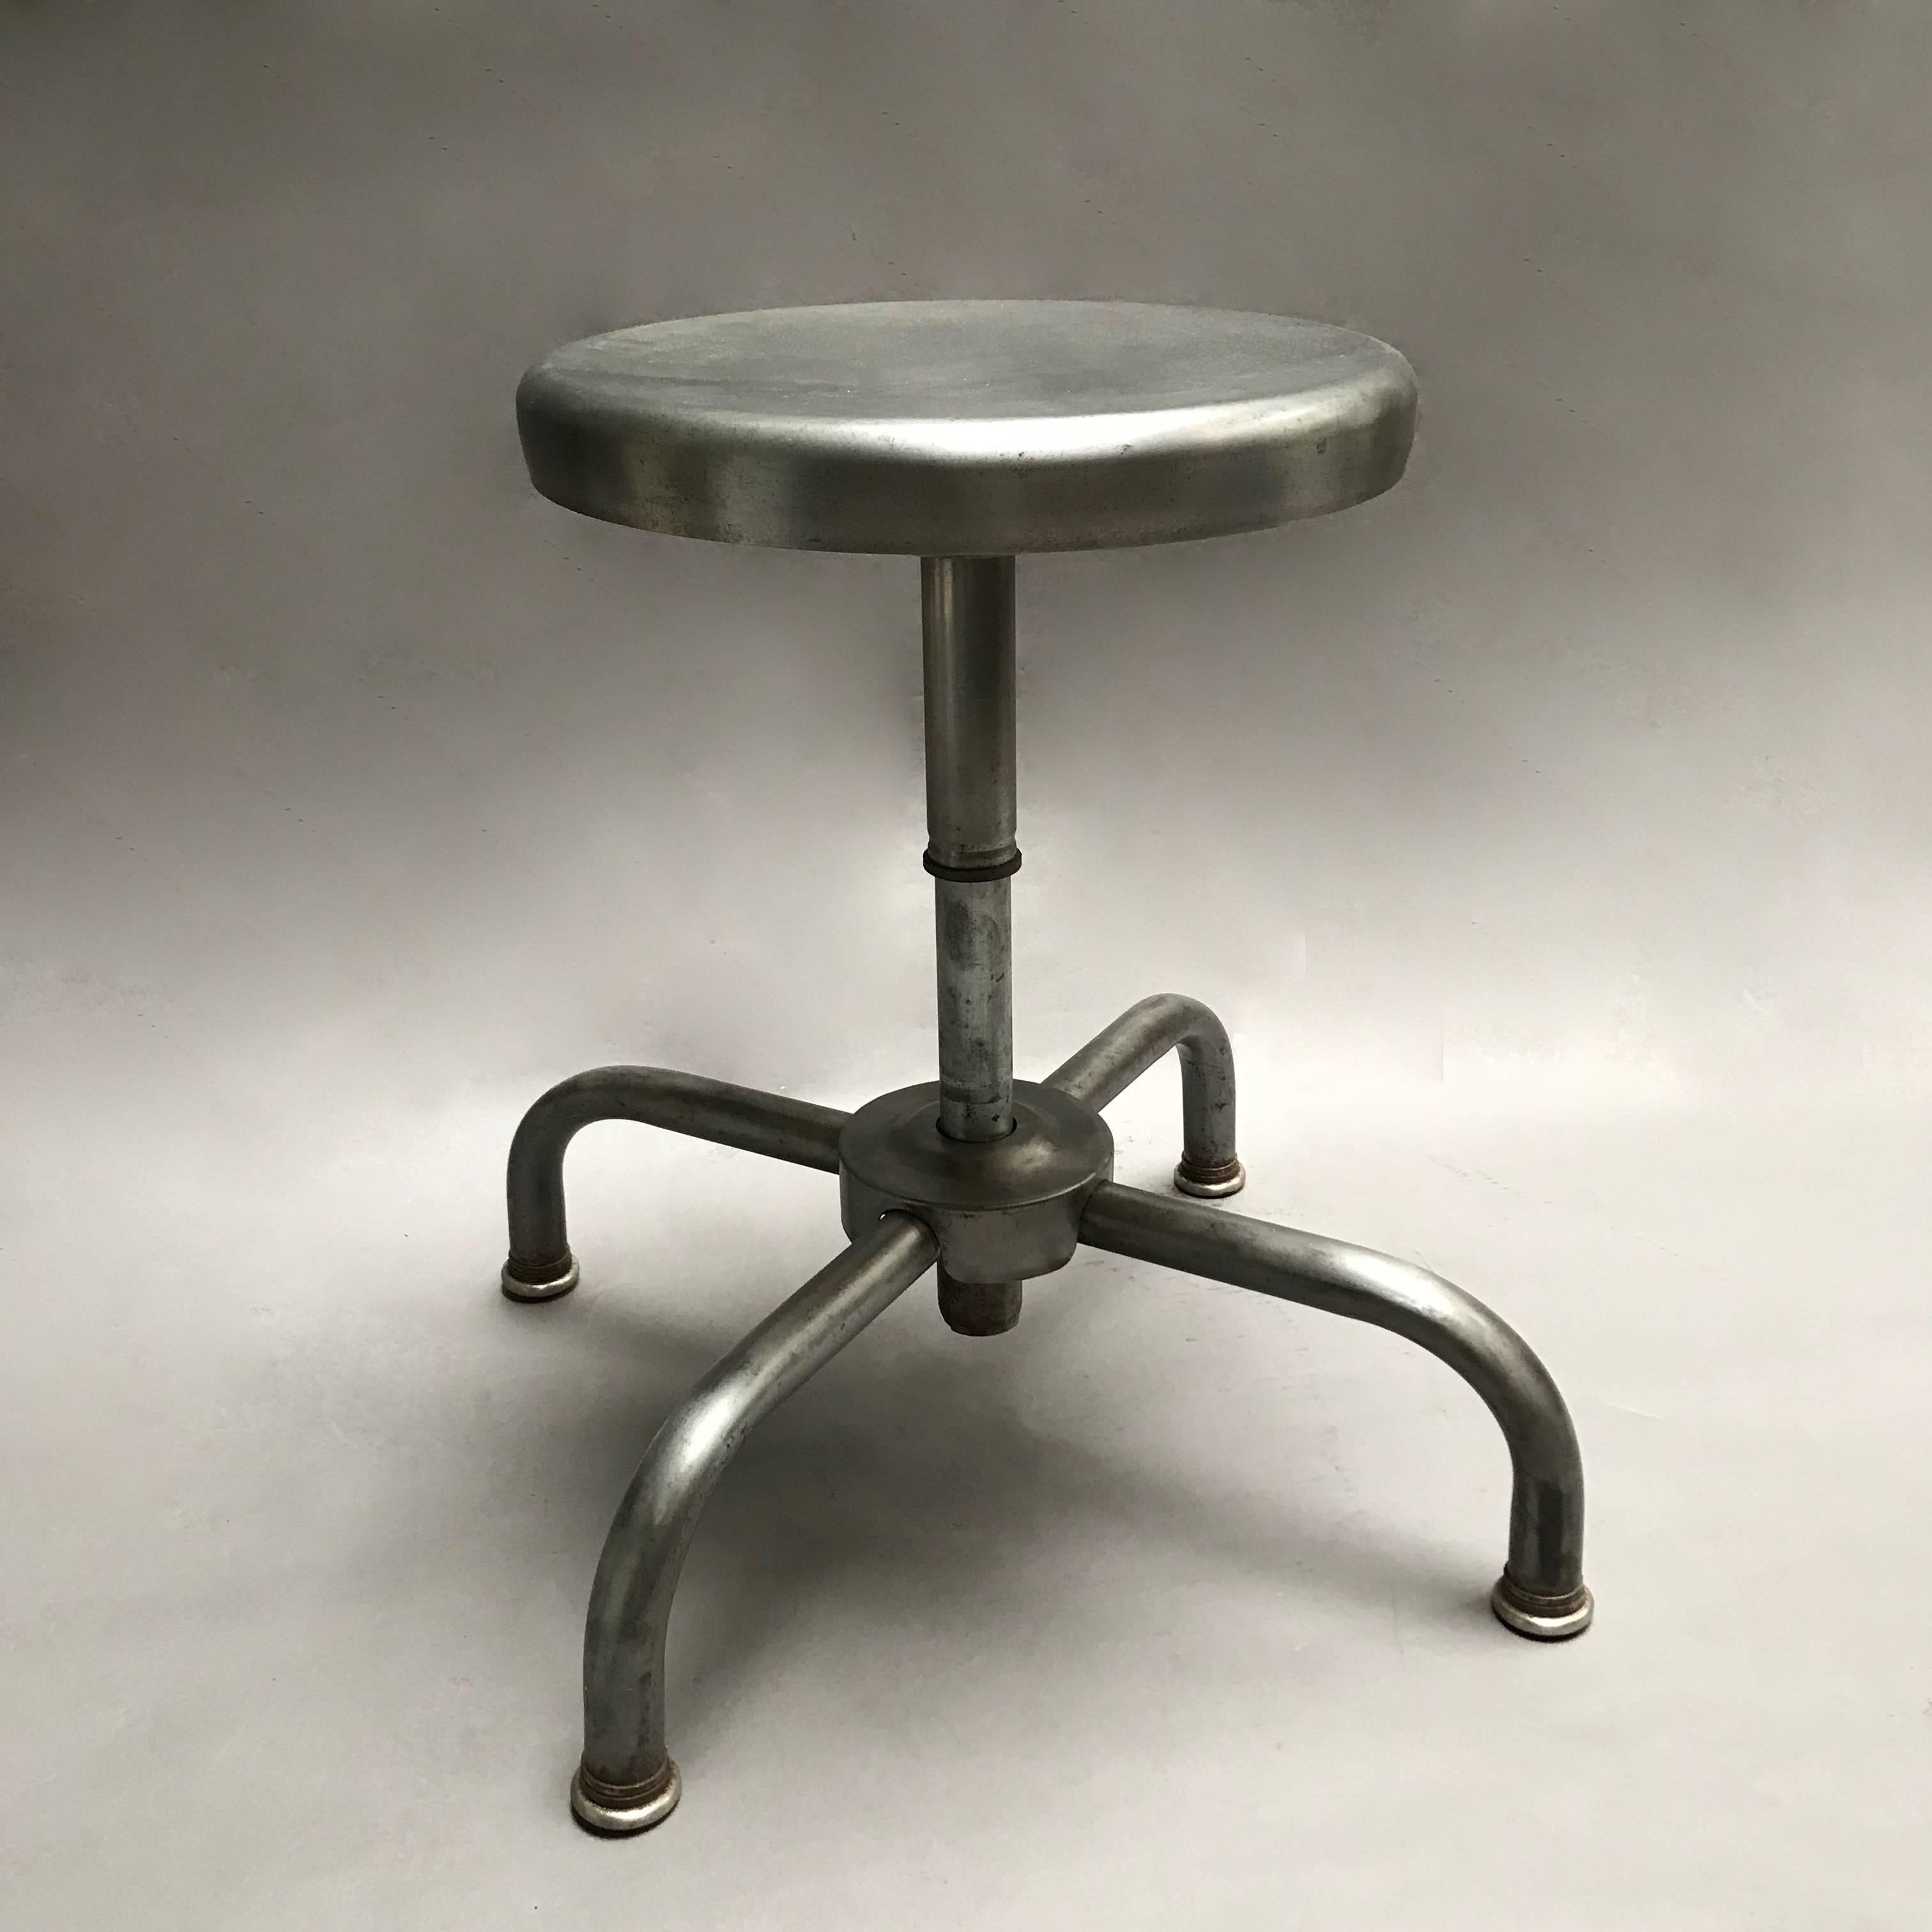 Industrial, adjustable, laboratory stool with newly brushed finish, features a four prong base and 13 inch diameter swivel seat. The seat height is easily adjustable from 15 - 20 inches.